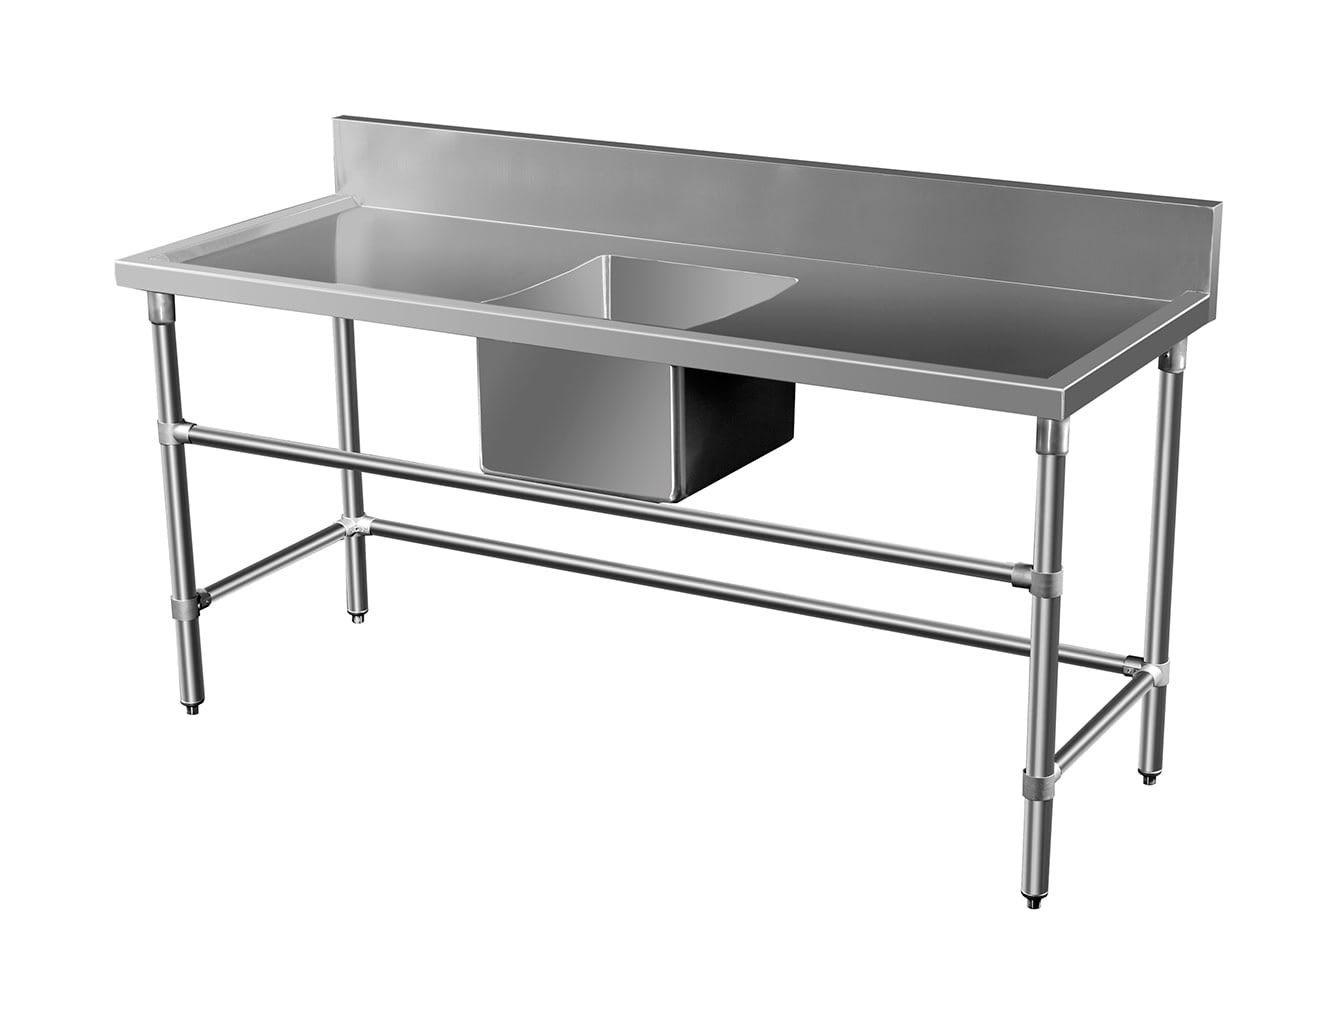 Stainless Steel Catering Sink – Right And Left Bench, 1800 x 700 x 900mm high